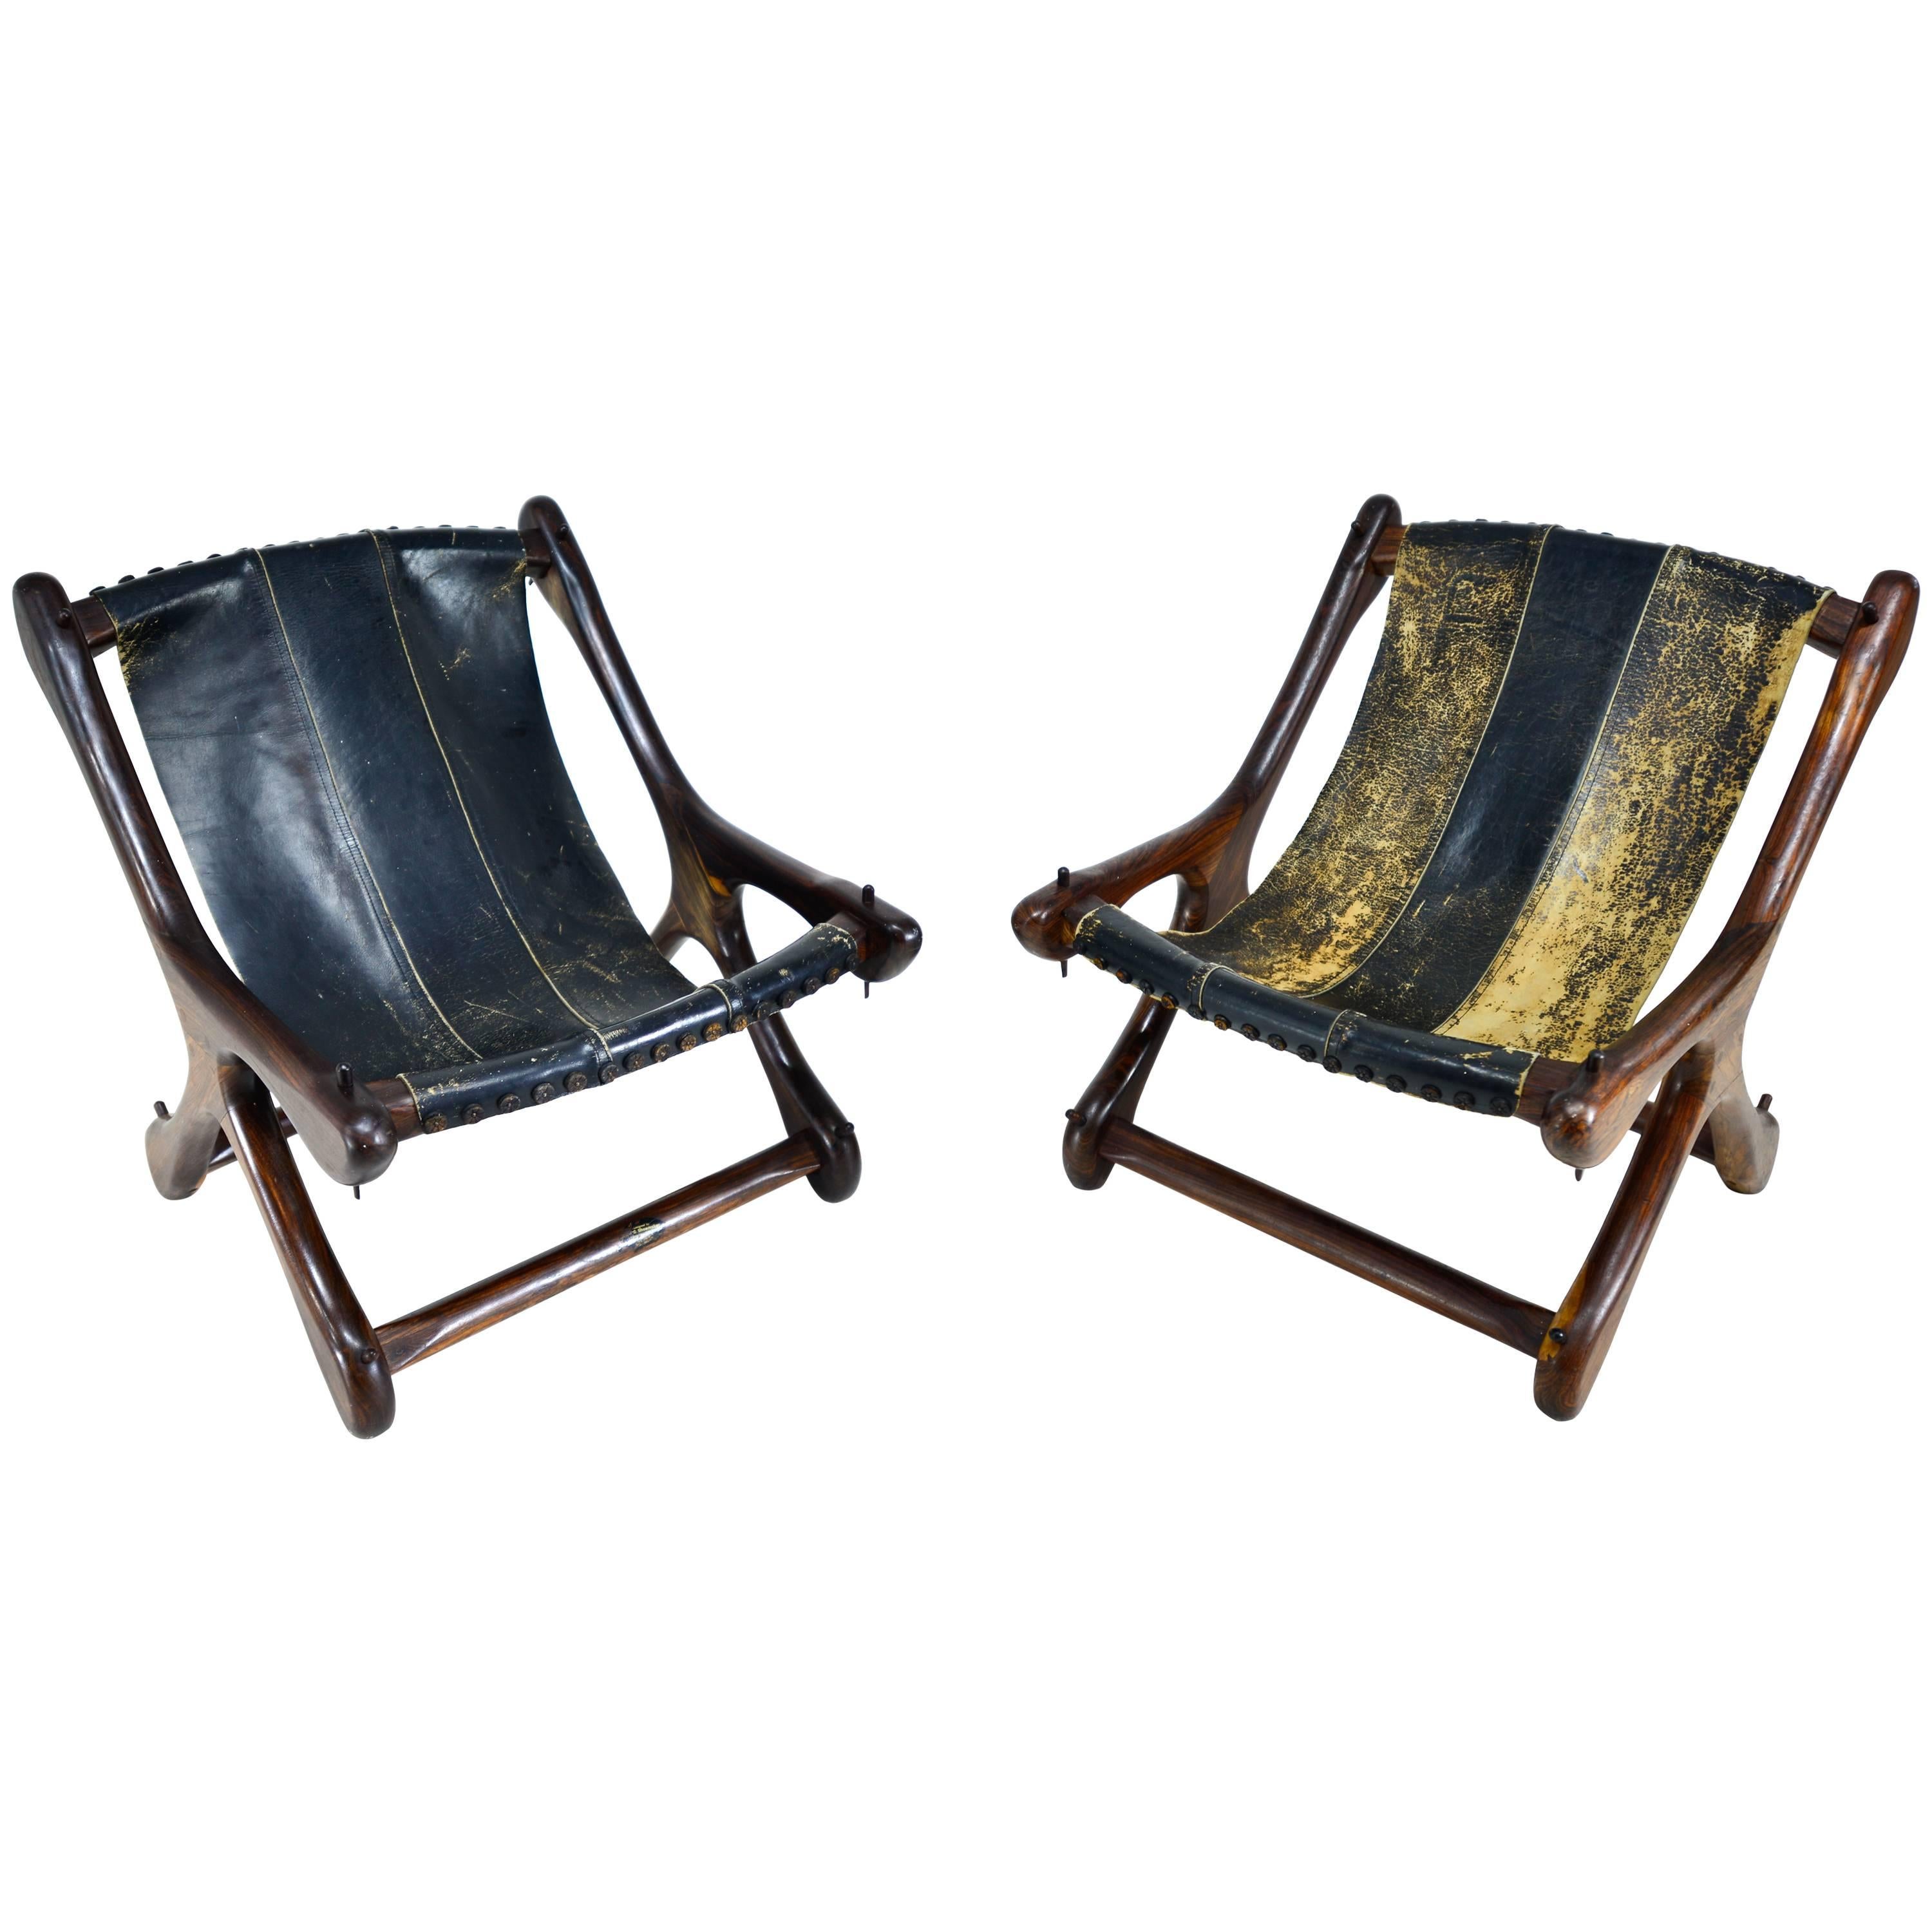 Don Shoemaker Pair of Sling "Sloucher" Chairs